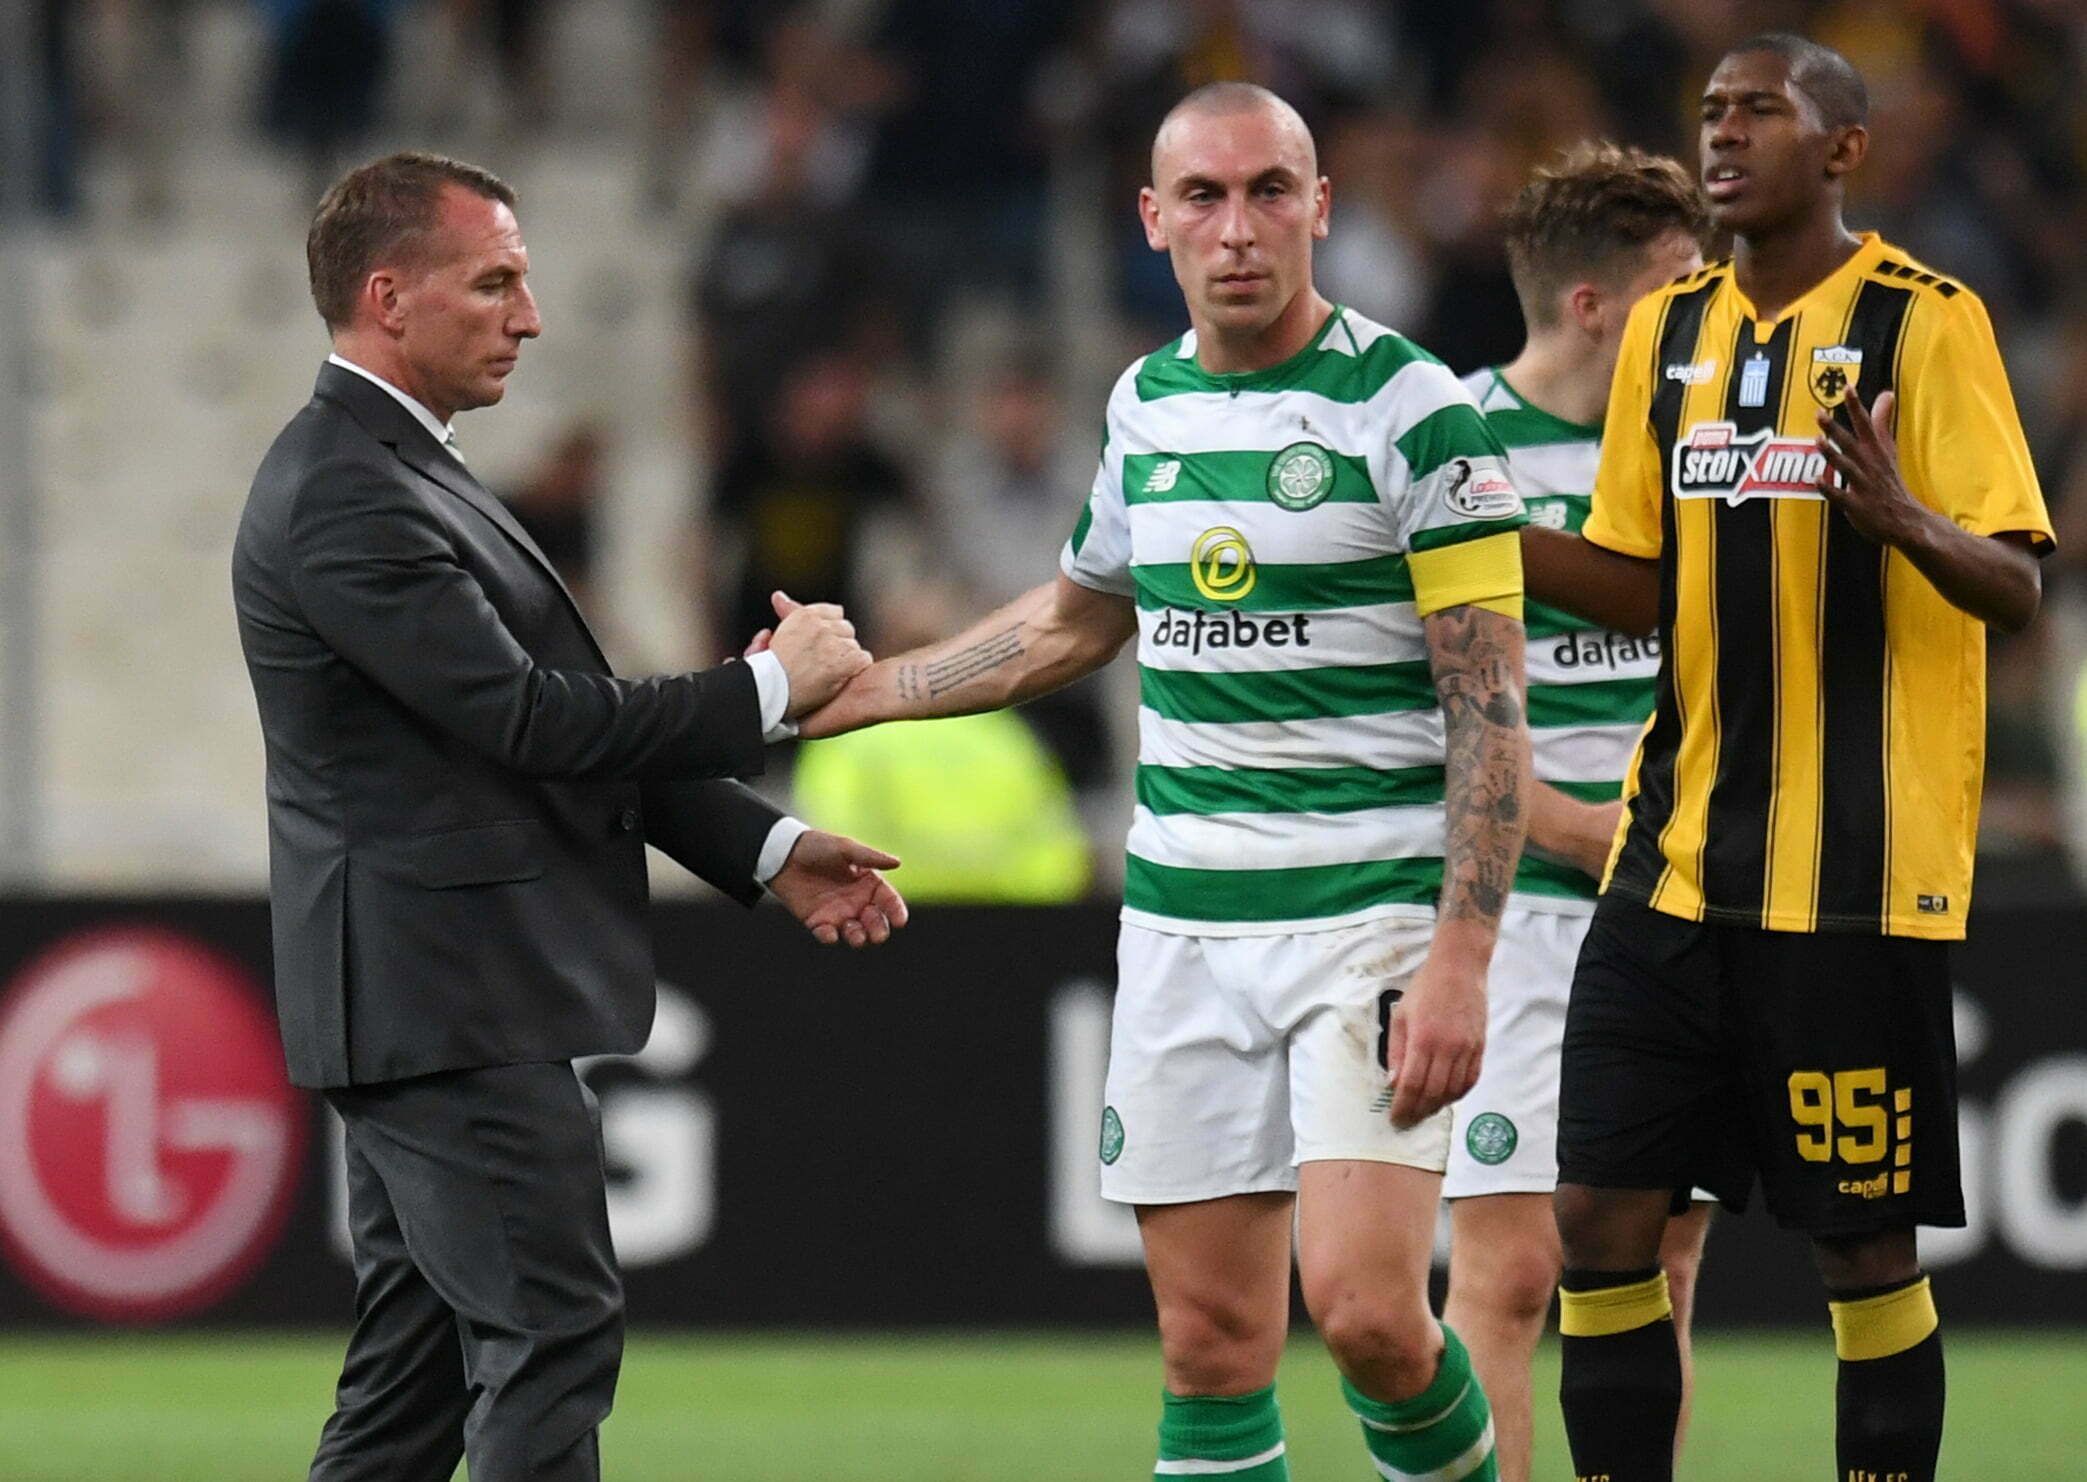 PETER MARTIN: Celtic gamble and lose Champions League chance